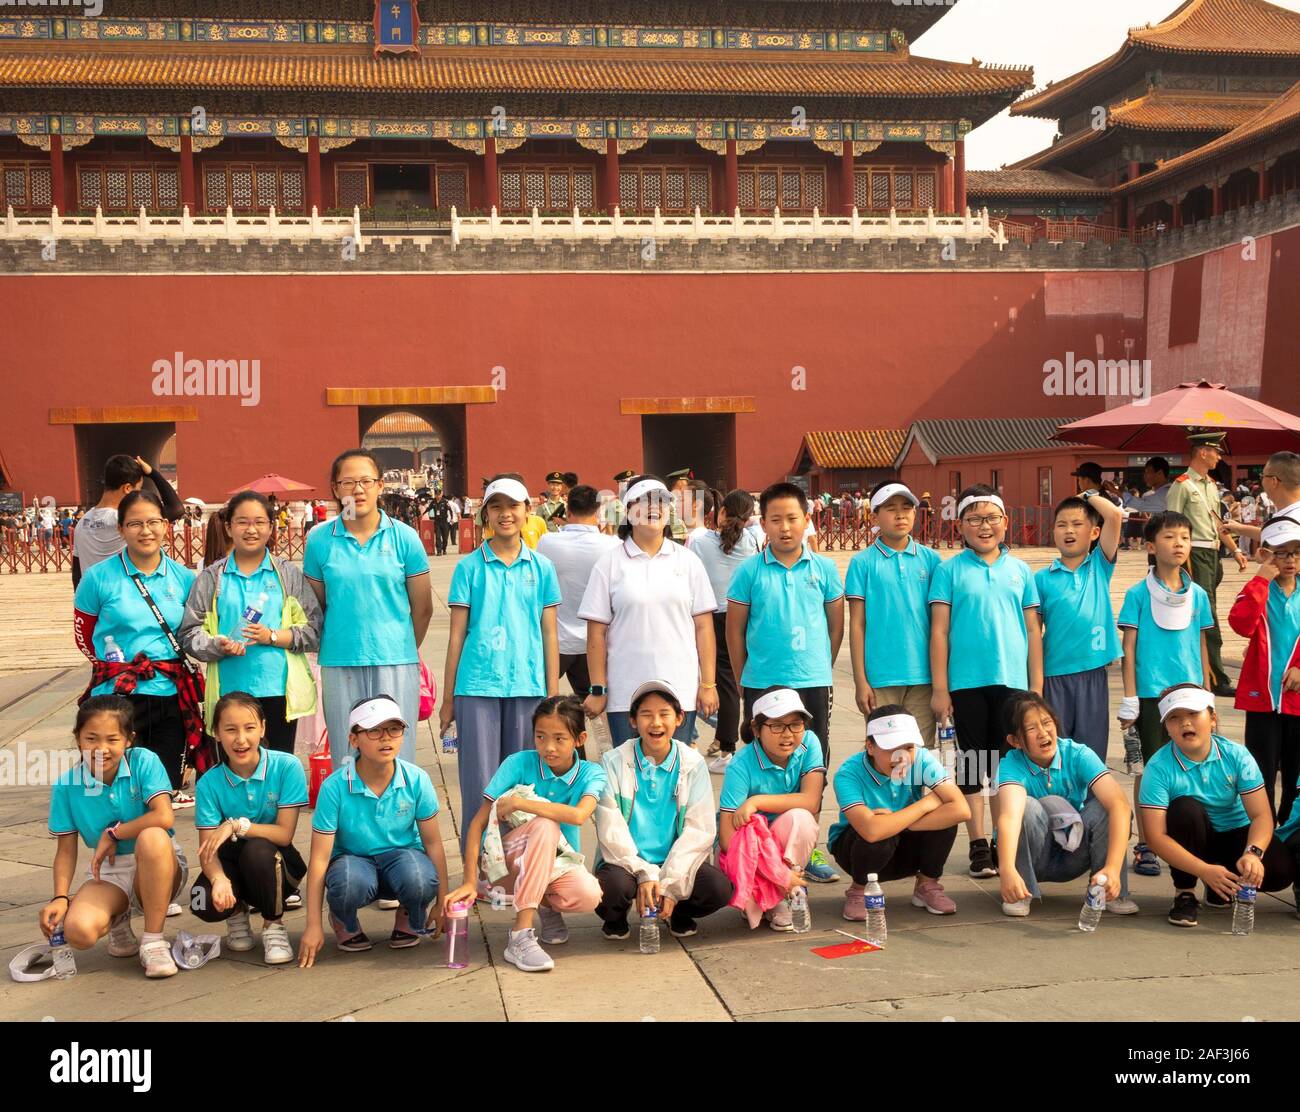 schoolchildren posing for commemorative photograph on field trip to Tiananmen Square and Forbidden City, Beijing, China Stock Photo